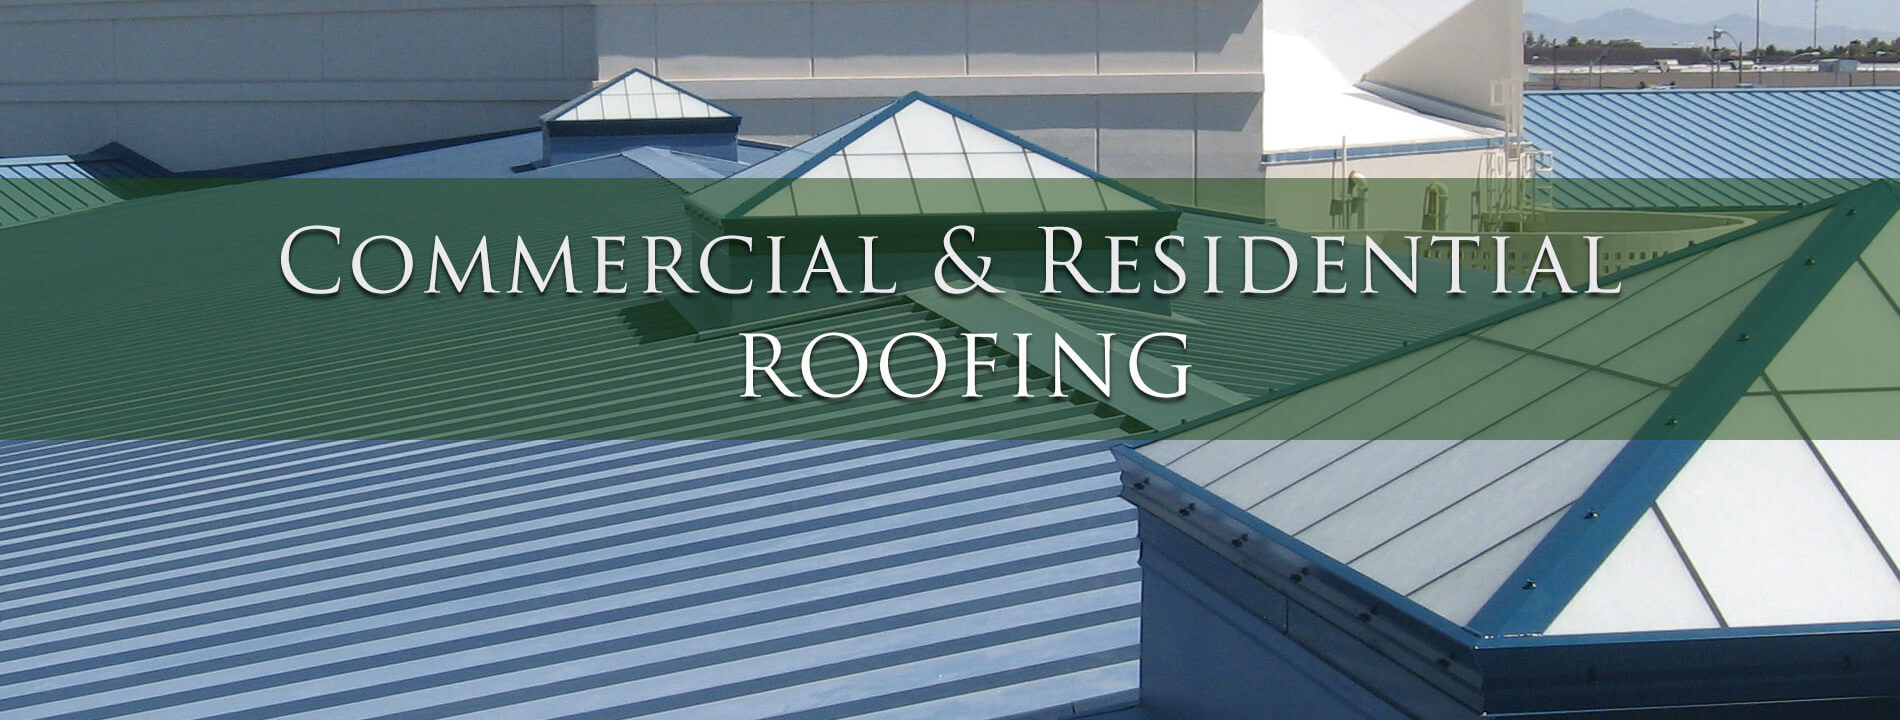 Roofing Contractors in New Orleans